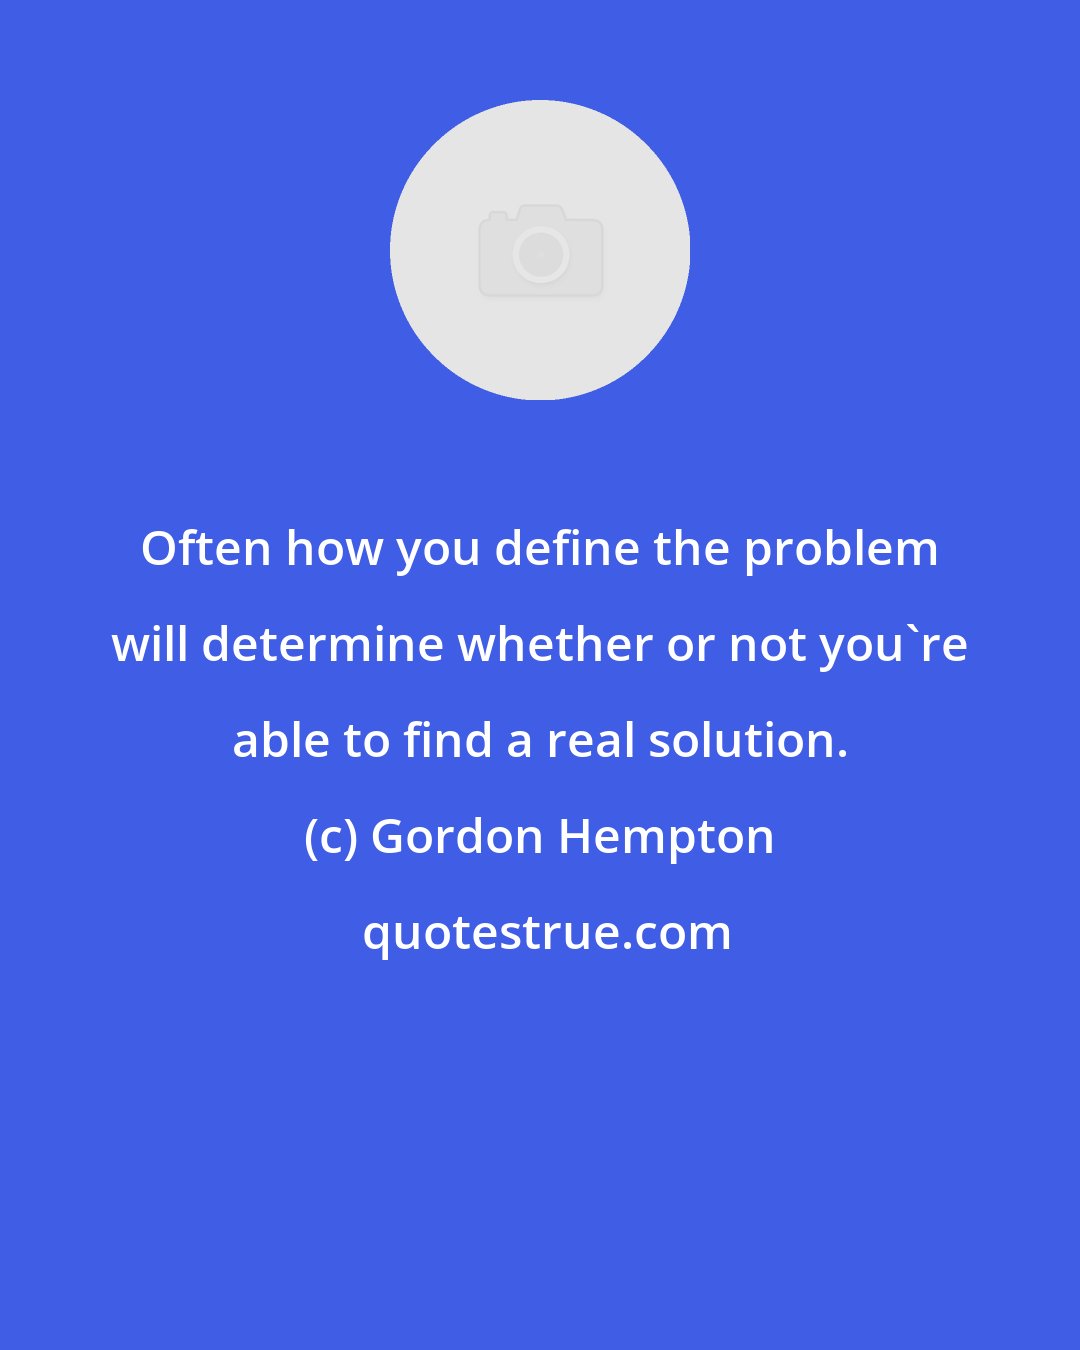 Gordon Hempton: Often how you define the problem will determine whether or not you're able to find a real solution.